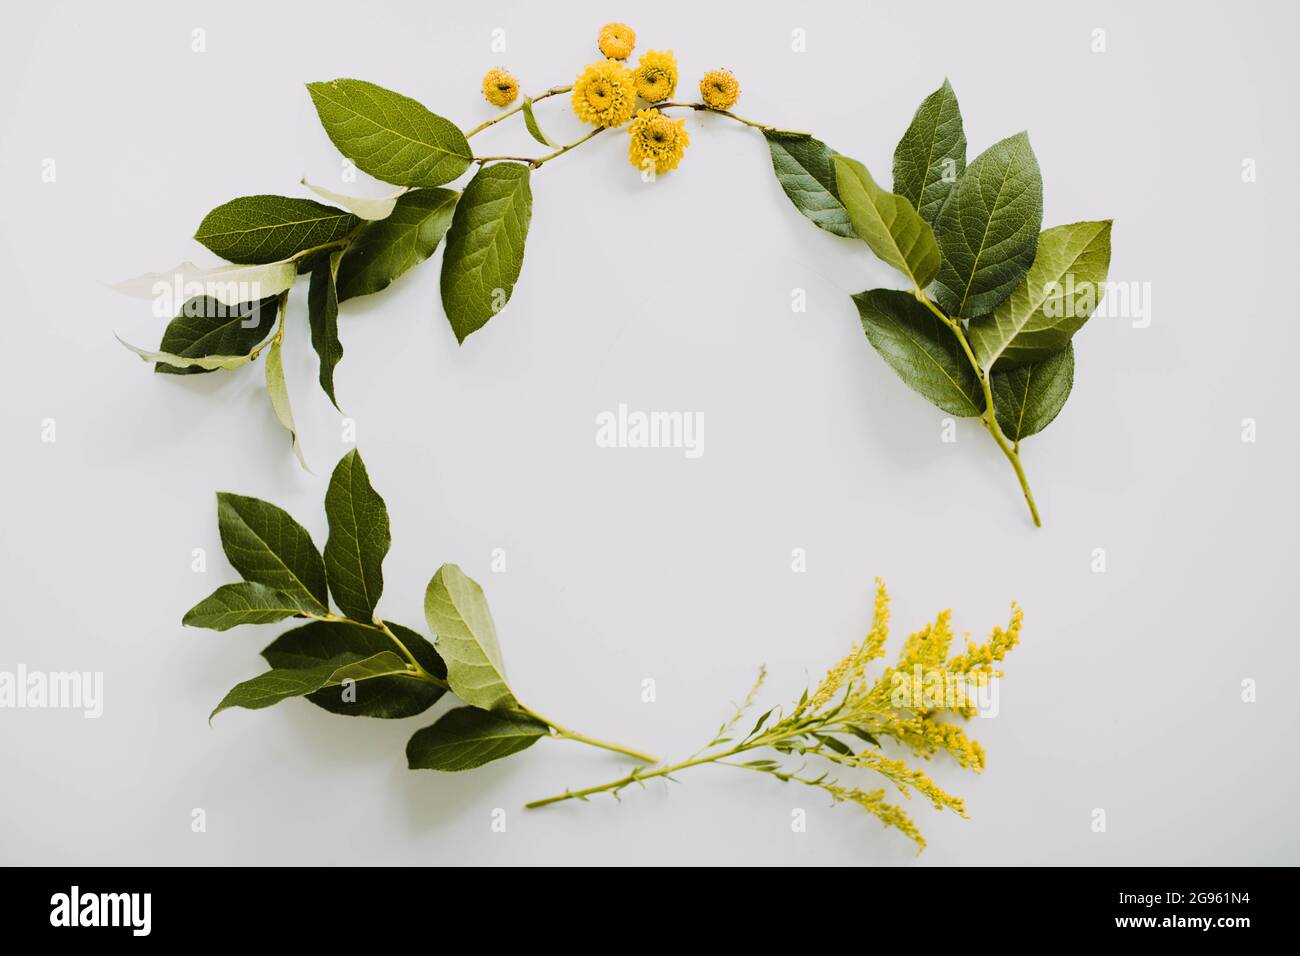 Overhead view of green leaves and yellow flowers in a circle on white Stock Photo